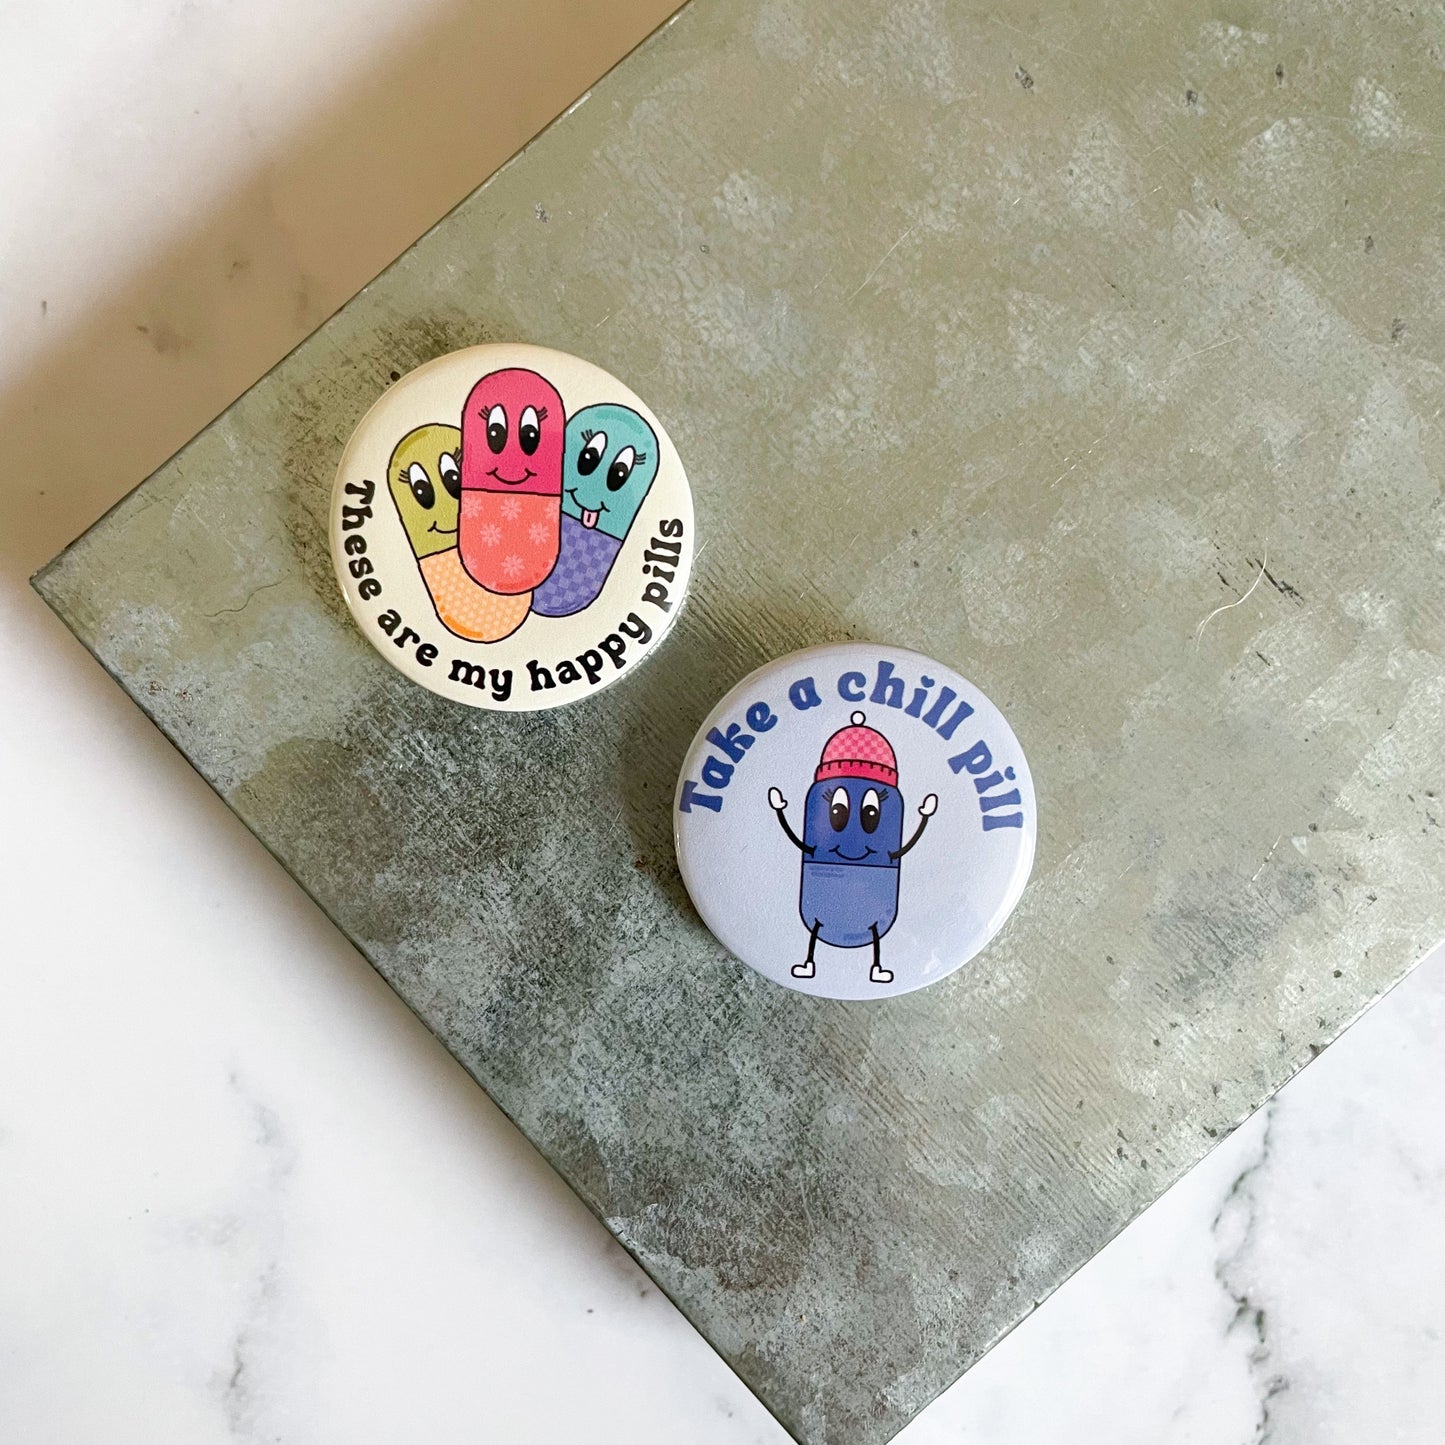 These Are My Happy Pills Button / Badge (Buy 4 Get 1 FREE)